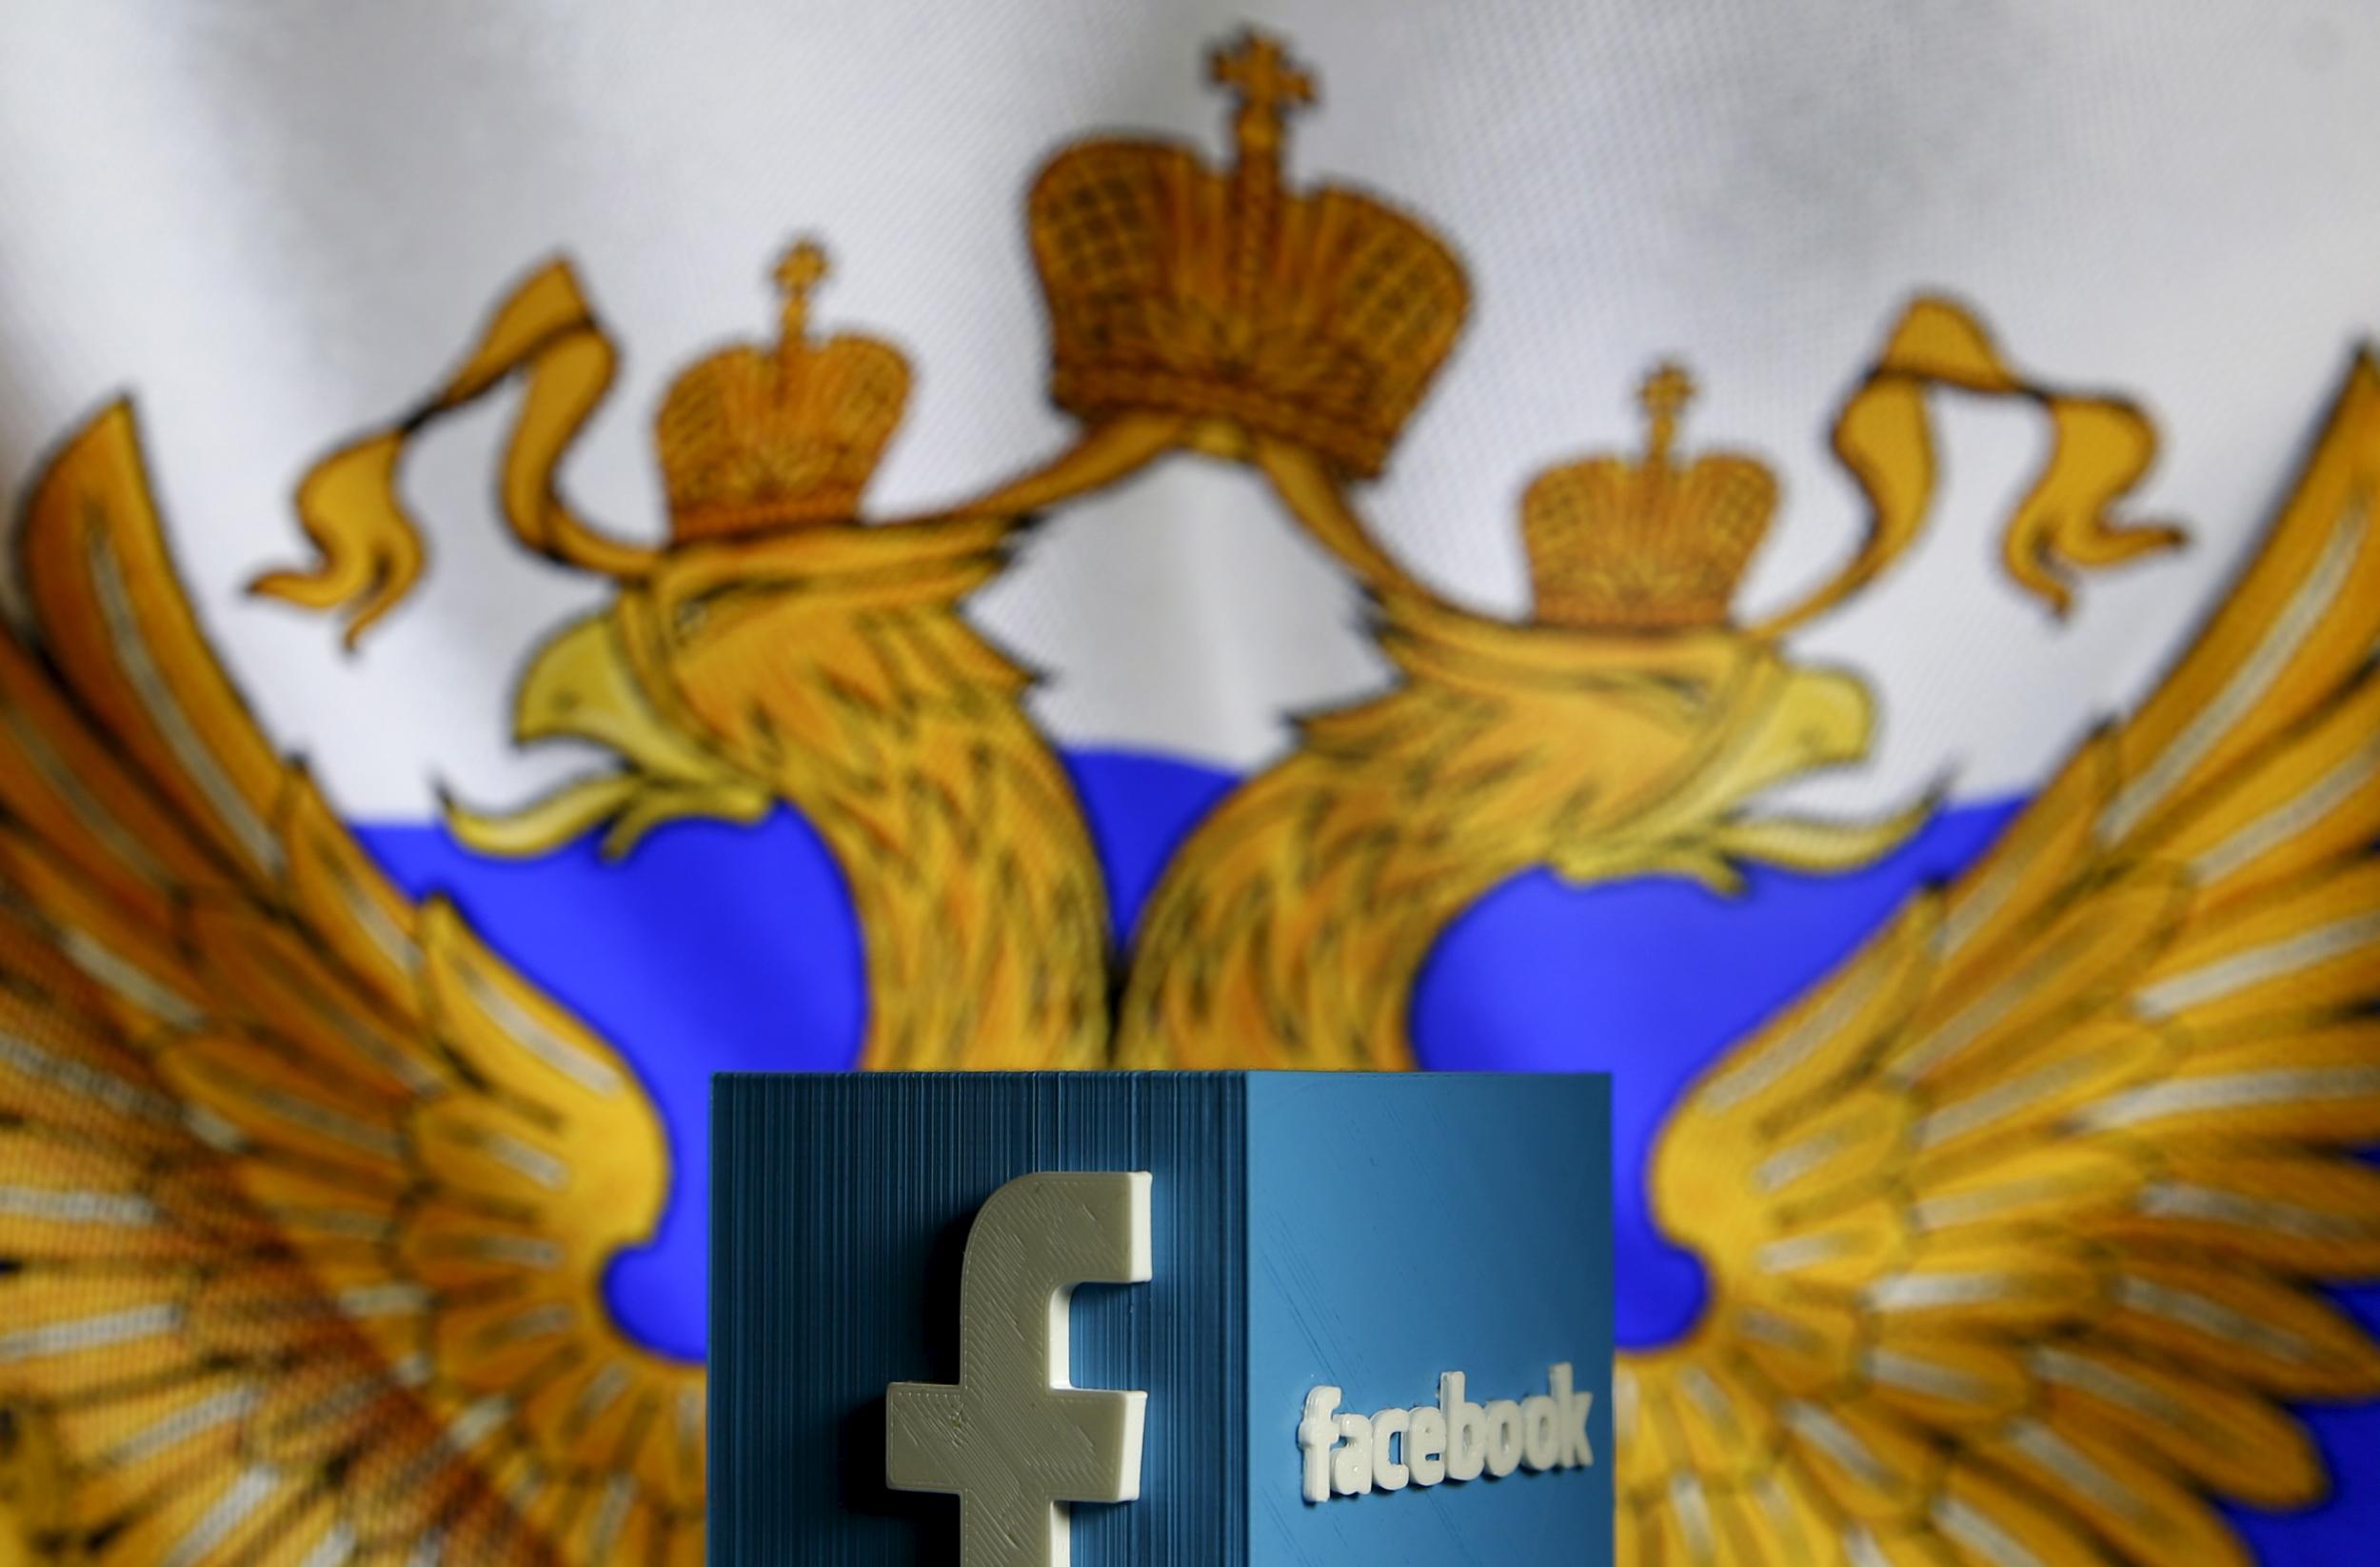 Russia's media watchdog Roskomnadzor could block Facebook in the country if the social network fails to relocate Russian citizen's data.